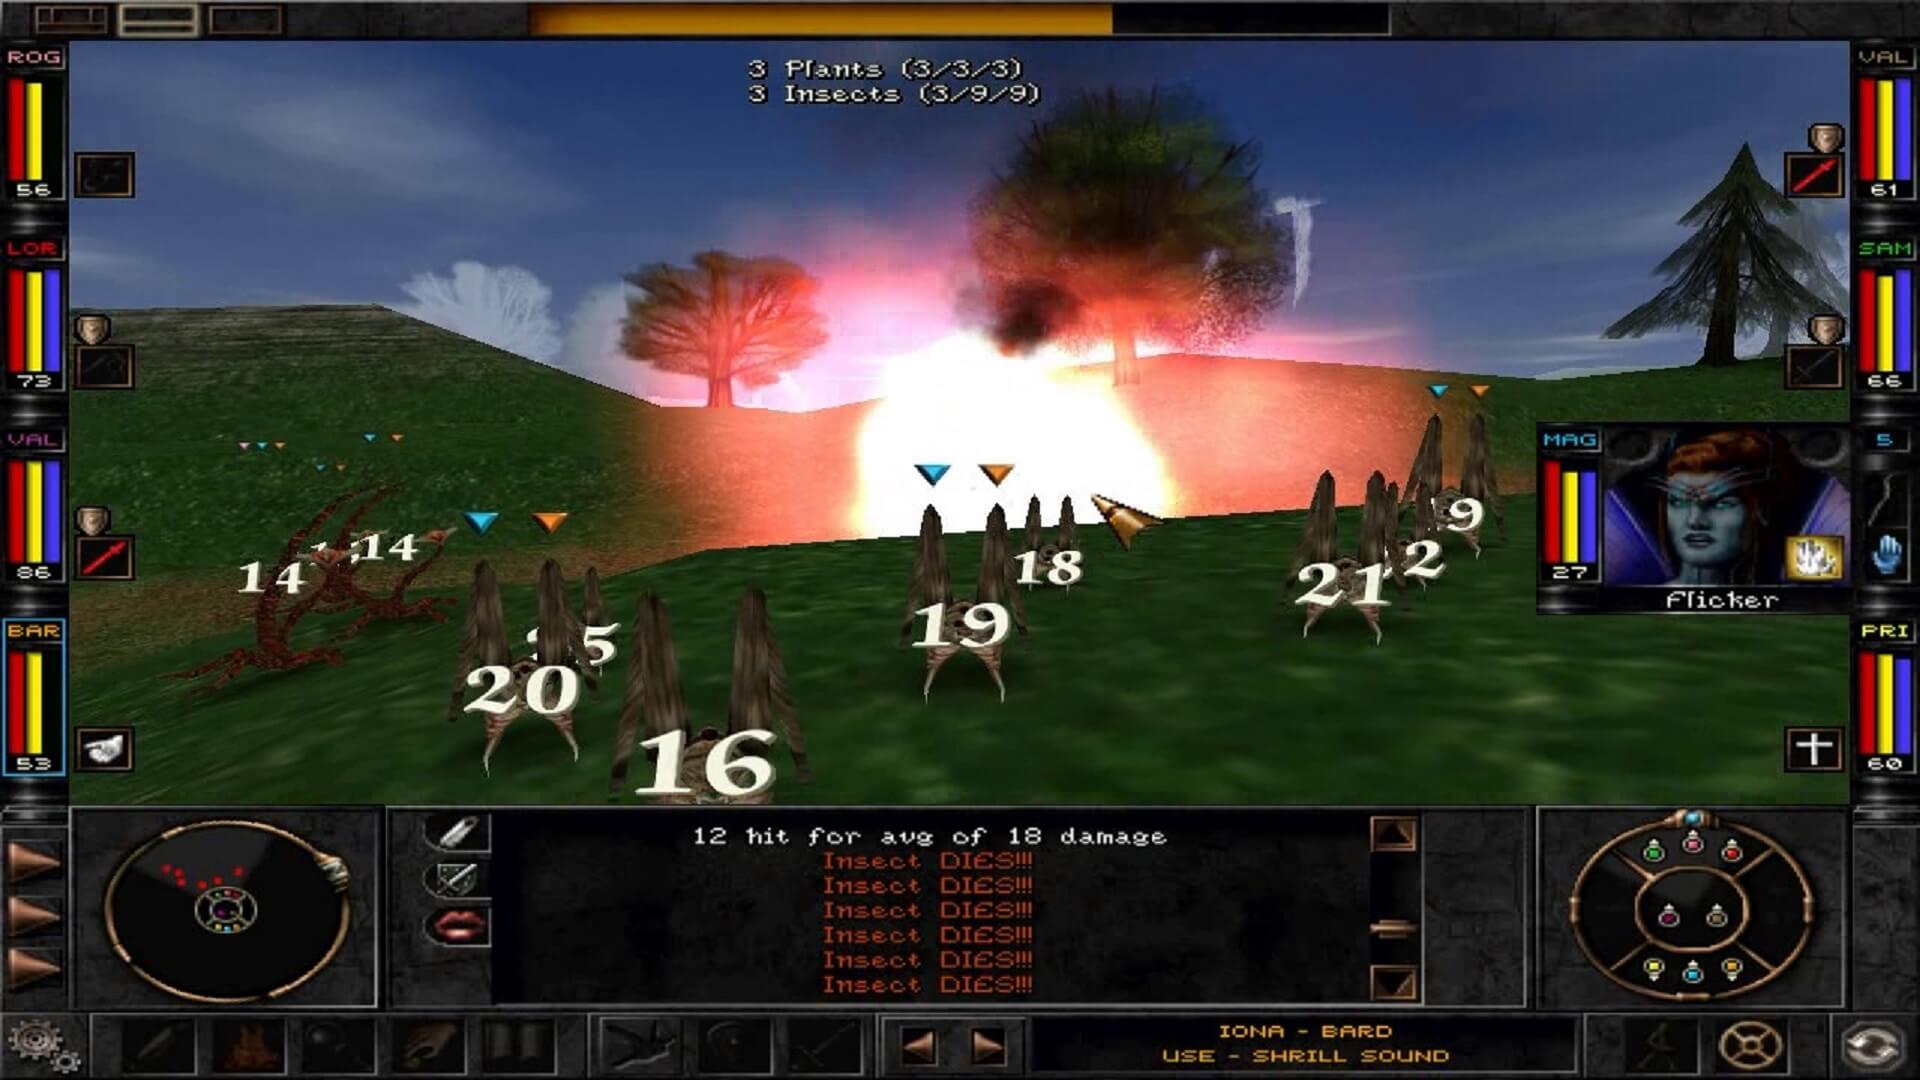 A shot of Wizardry 8, which almost certainly won't be the basis for the new Wizardry blockchain game